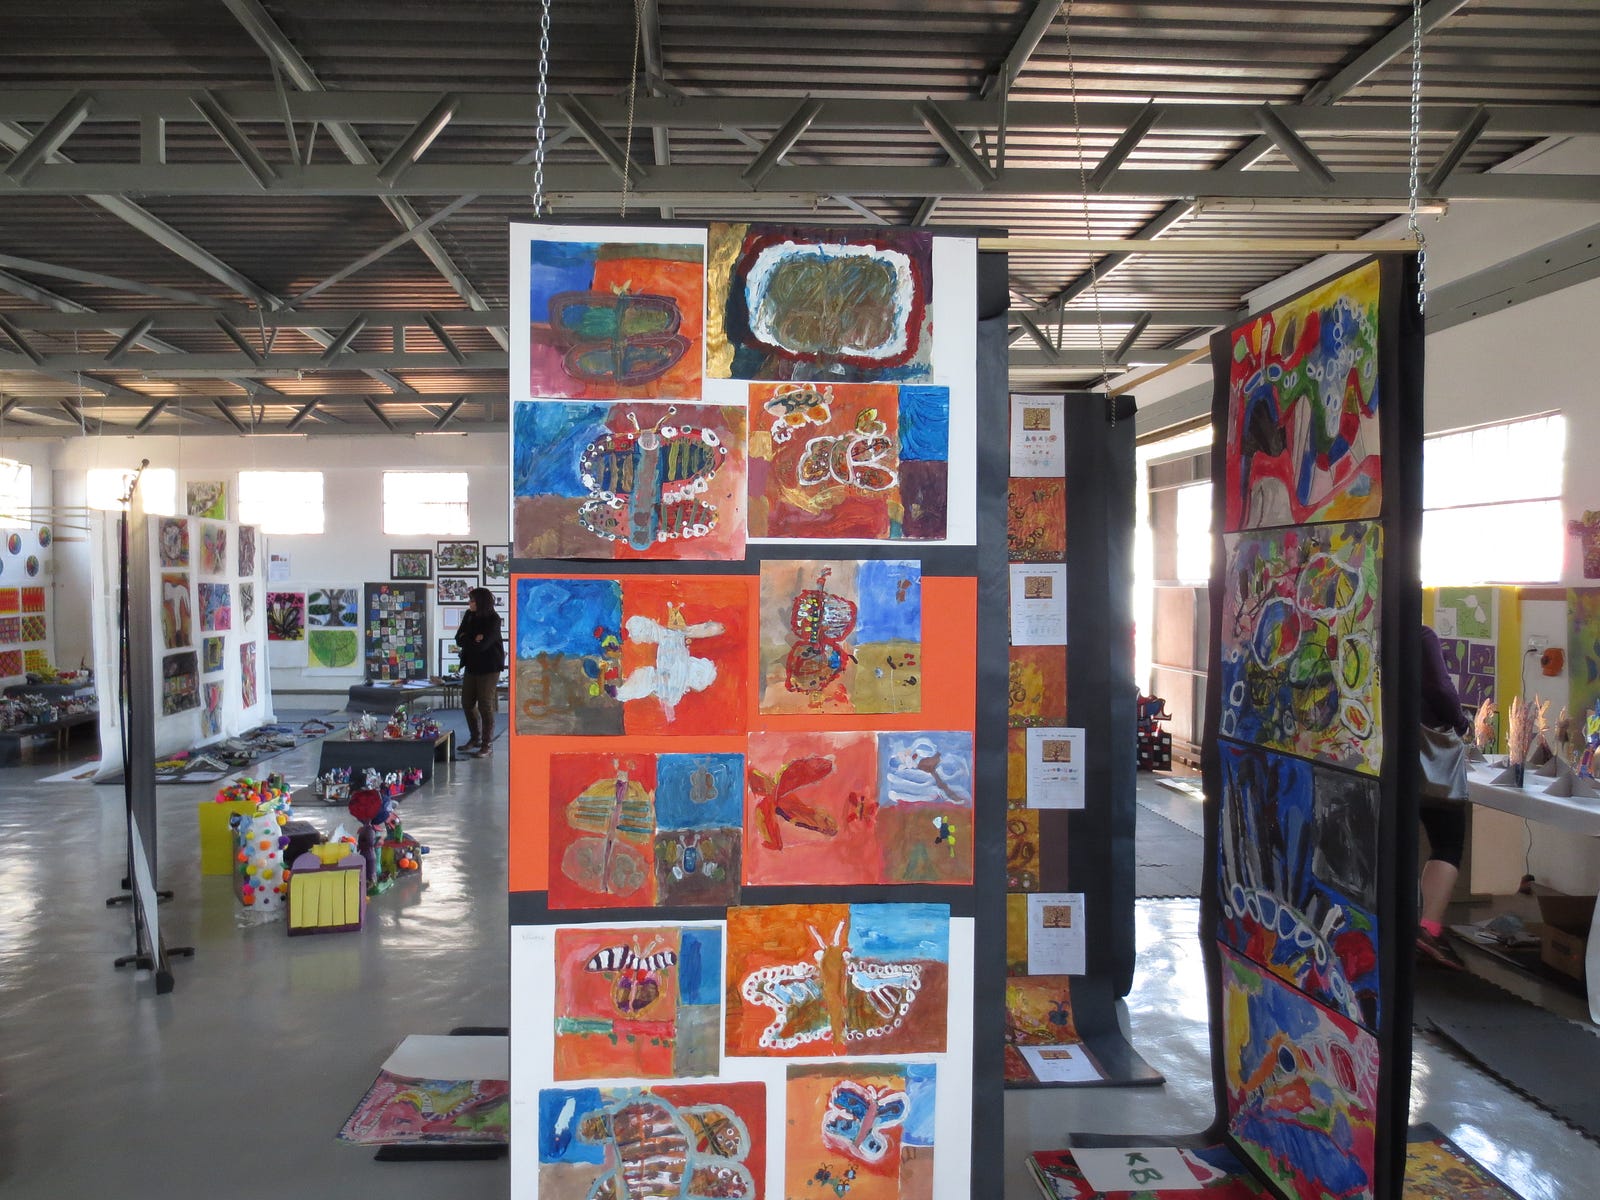 Student Voice and Choice: Curation of IB Art Exhibit